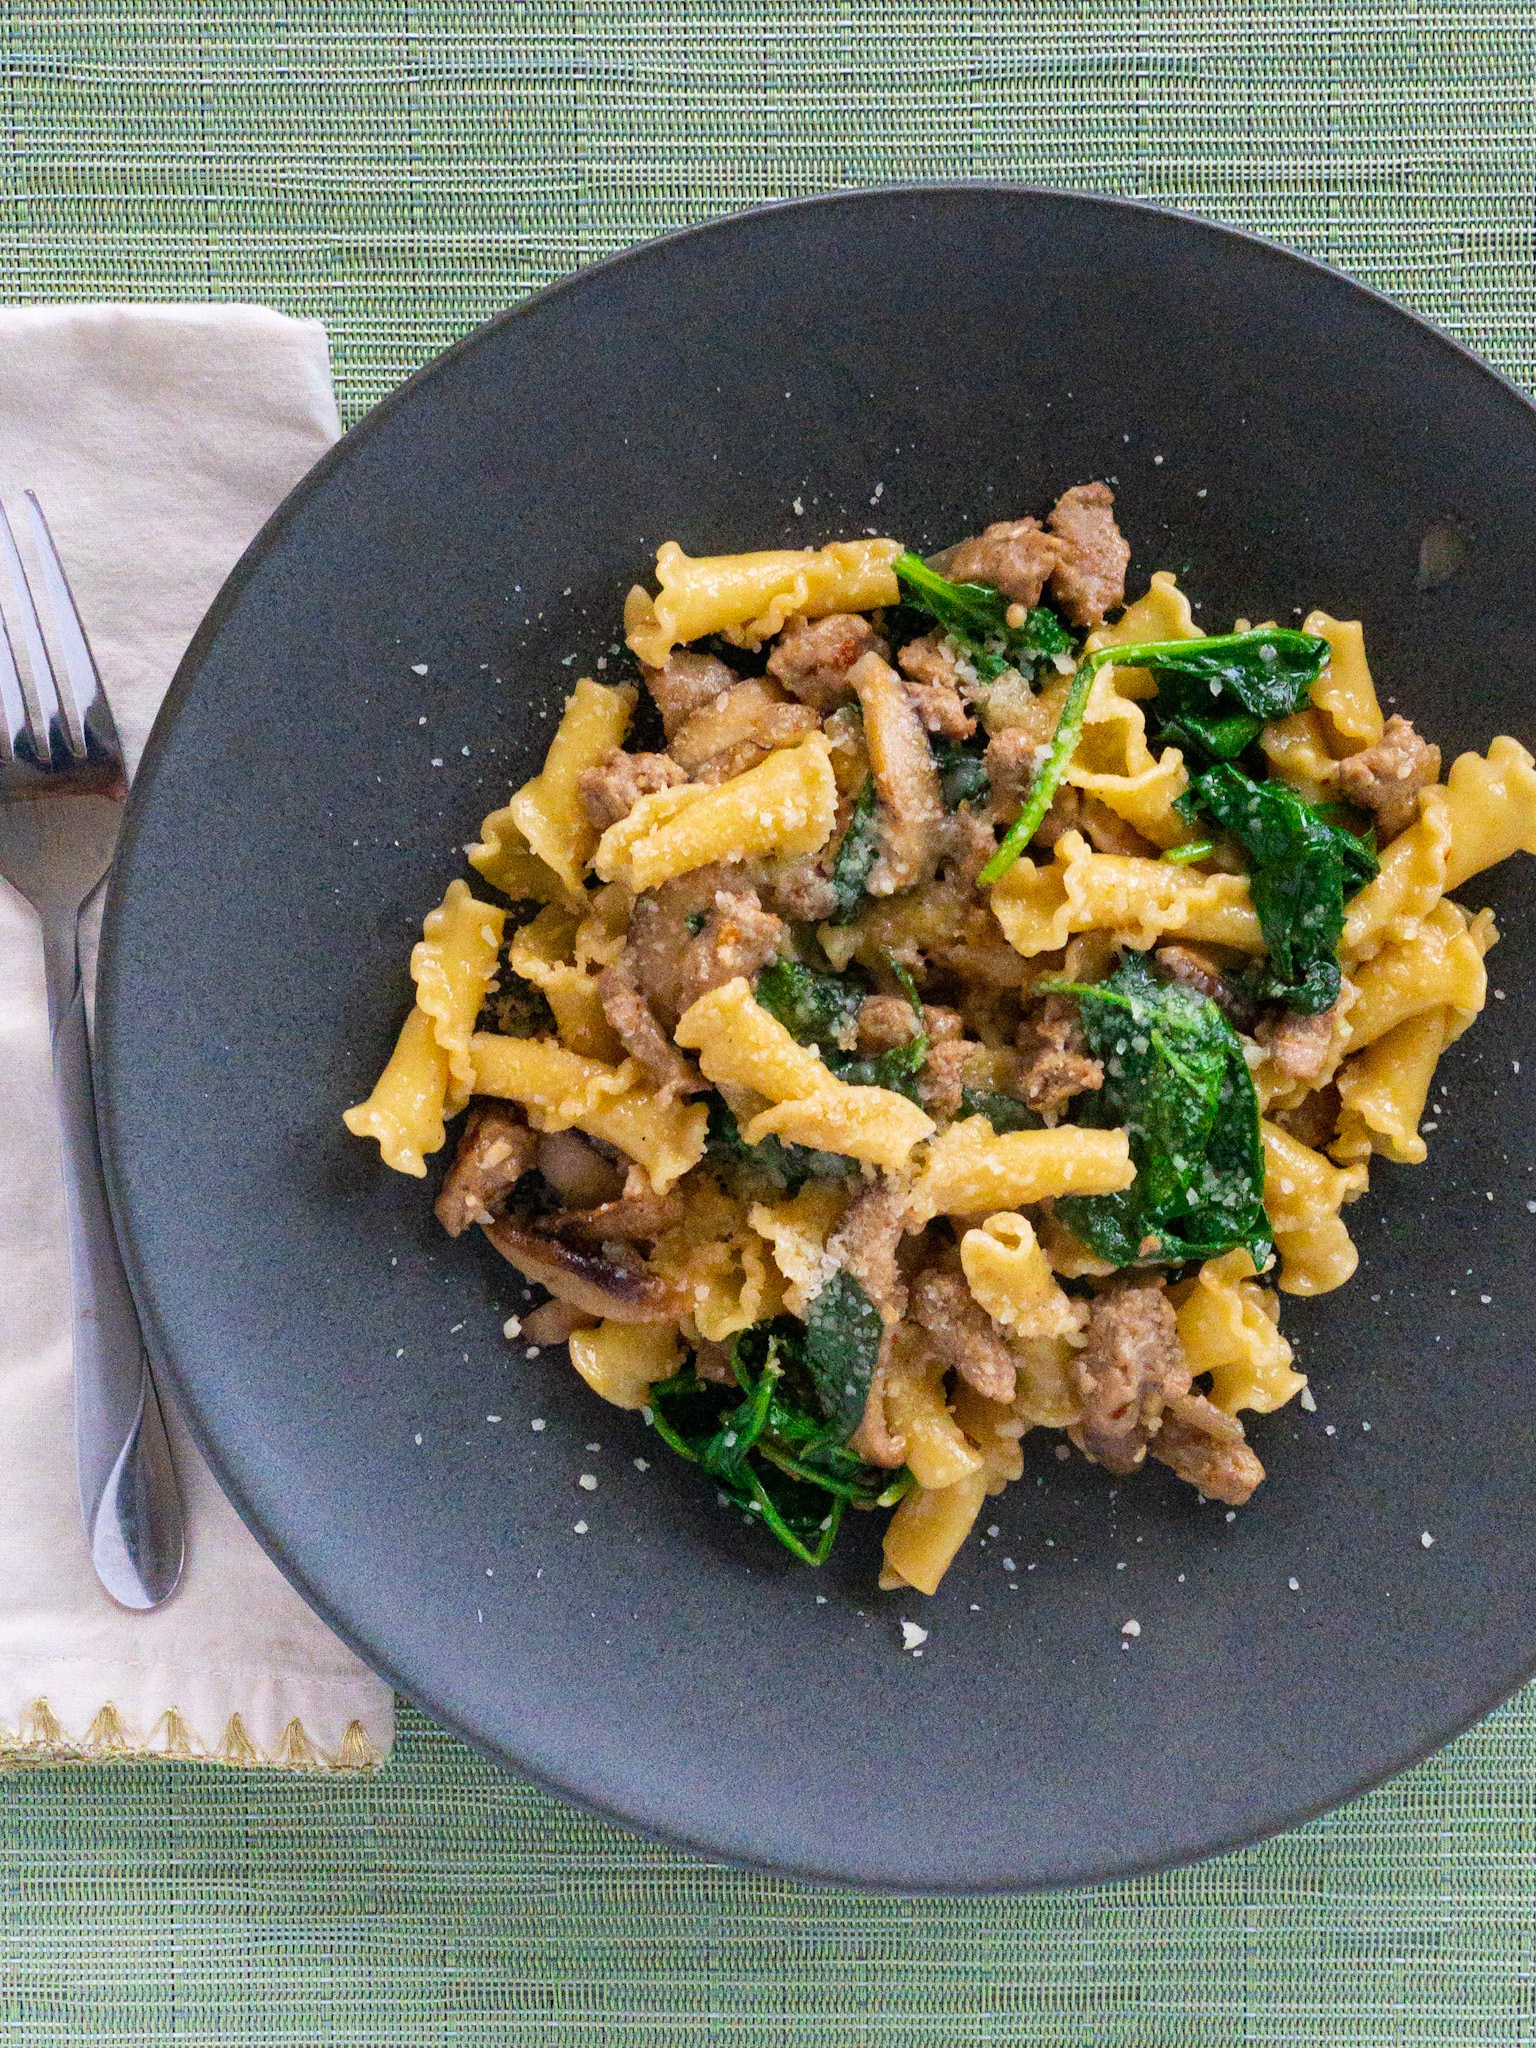 Pasta with Sausage, Mushrooms and Spinach - Sauté By The Bay